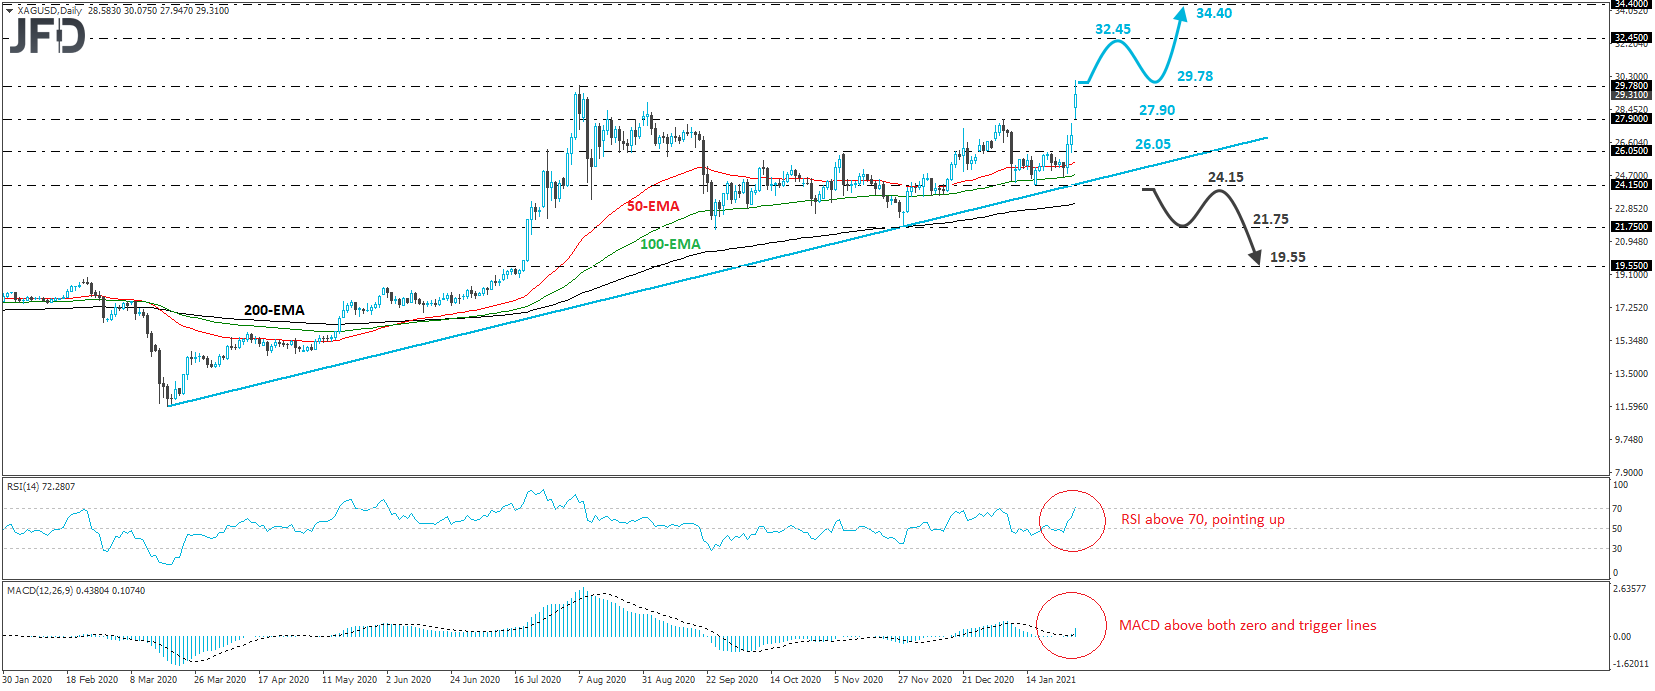 Silver XAG/USD daily chart technical analysis